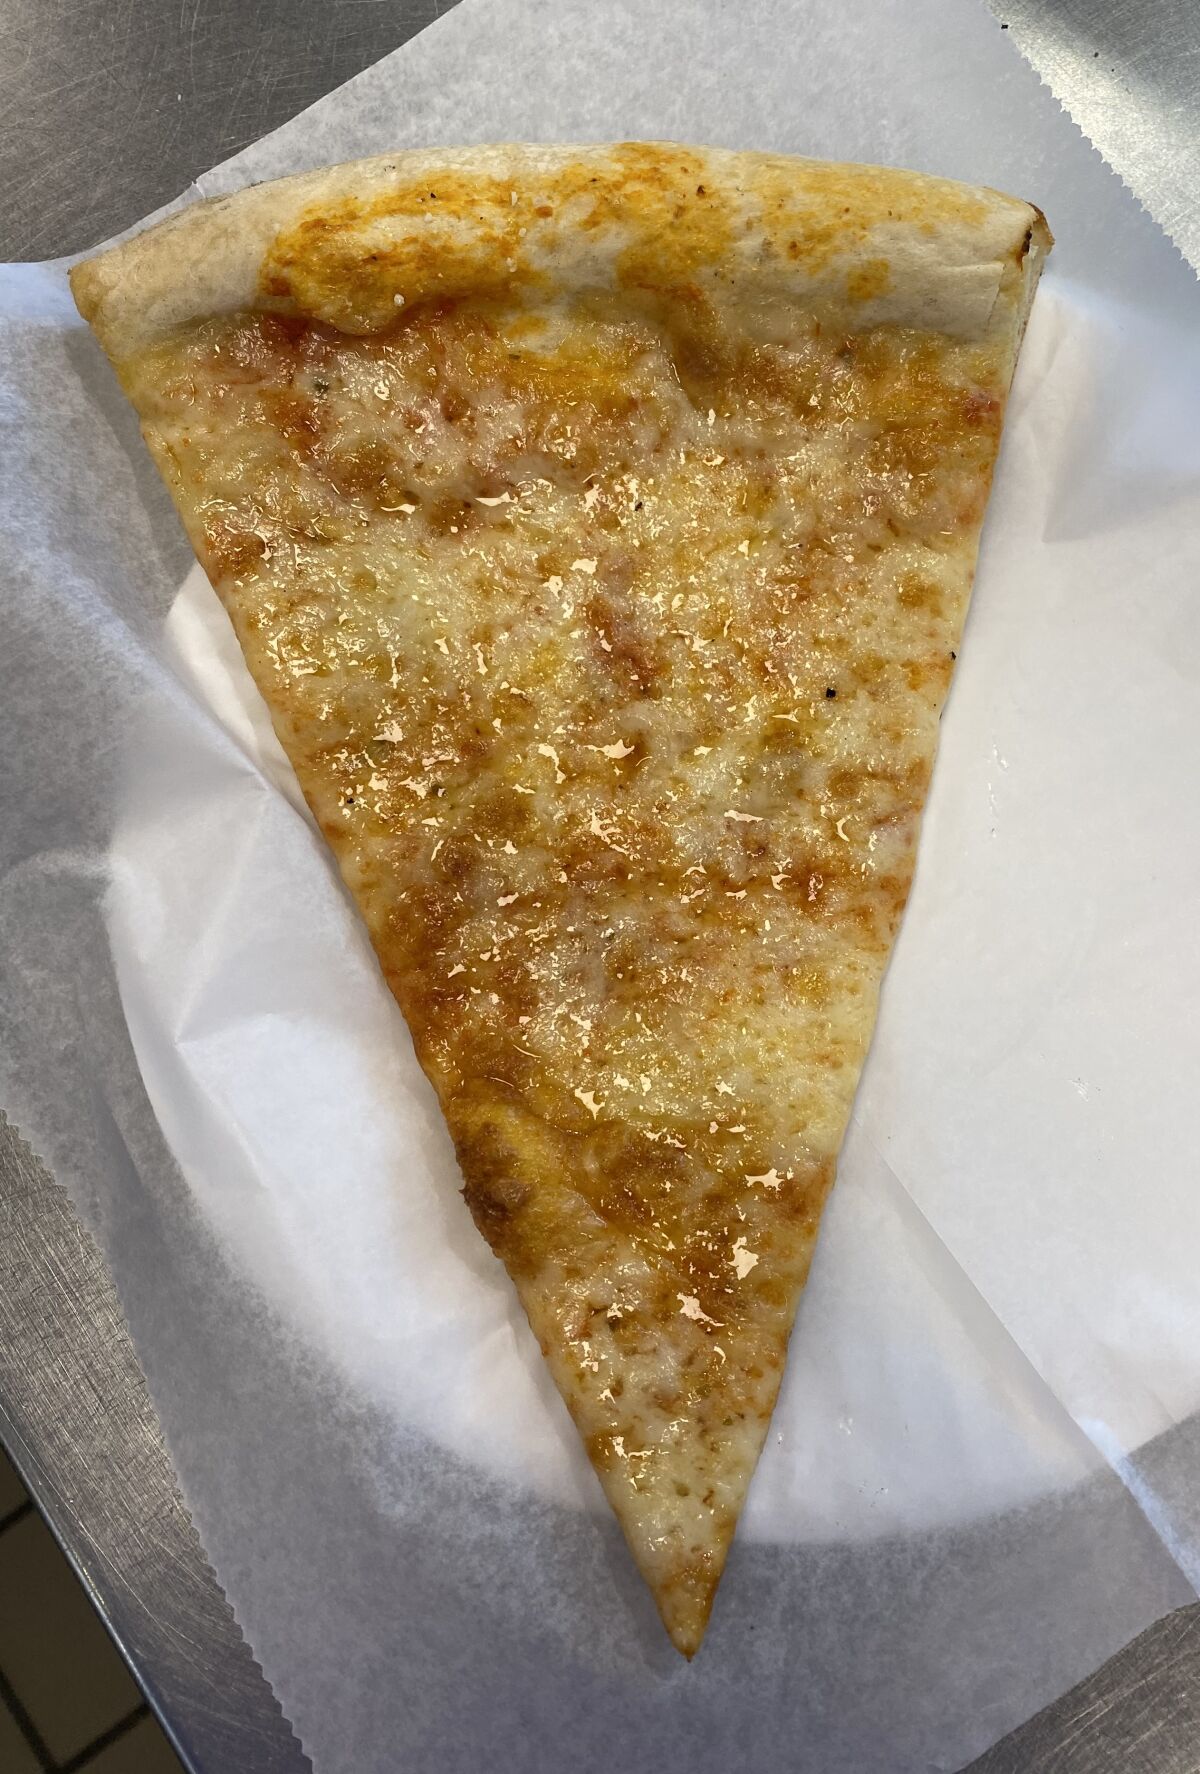 The success of Levitan’s time-restricted diet depends on never thinking of delicious cheesy slices of pizza like this one from Mr. Moto Pizza House, 617 Pearl St.